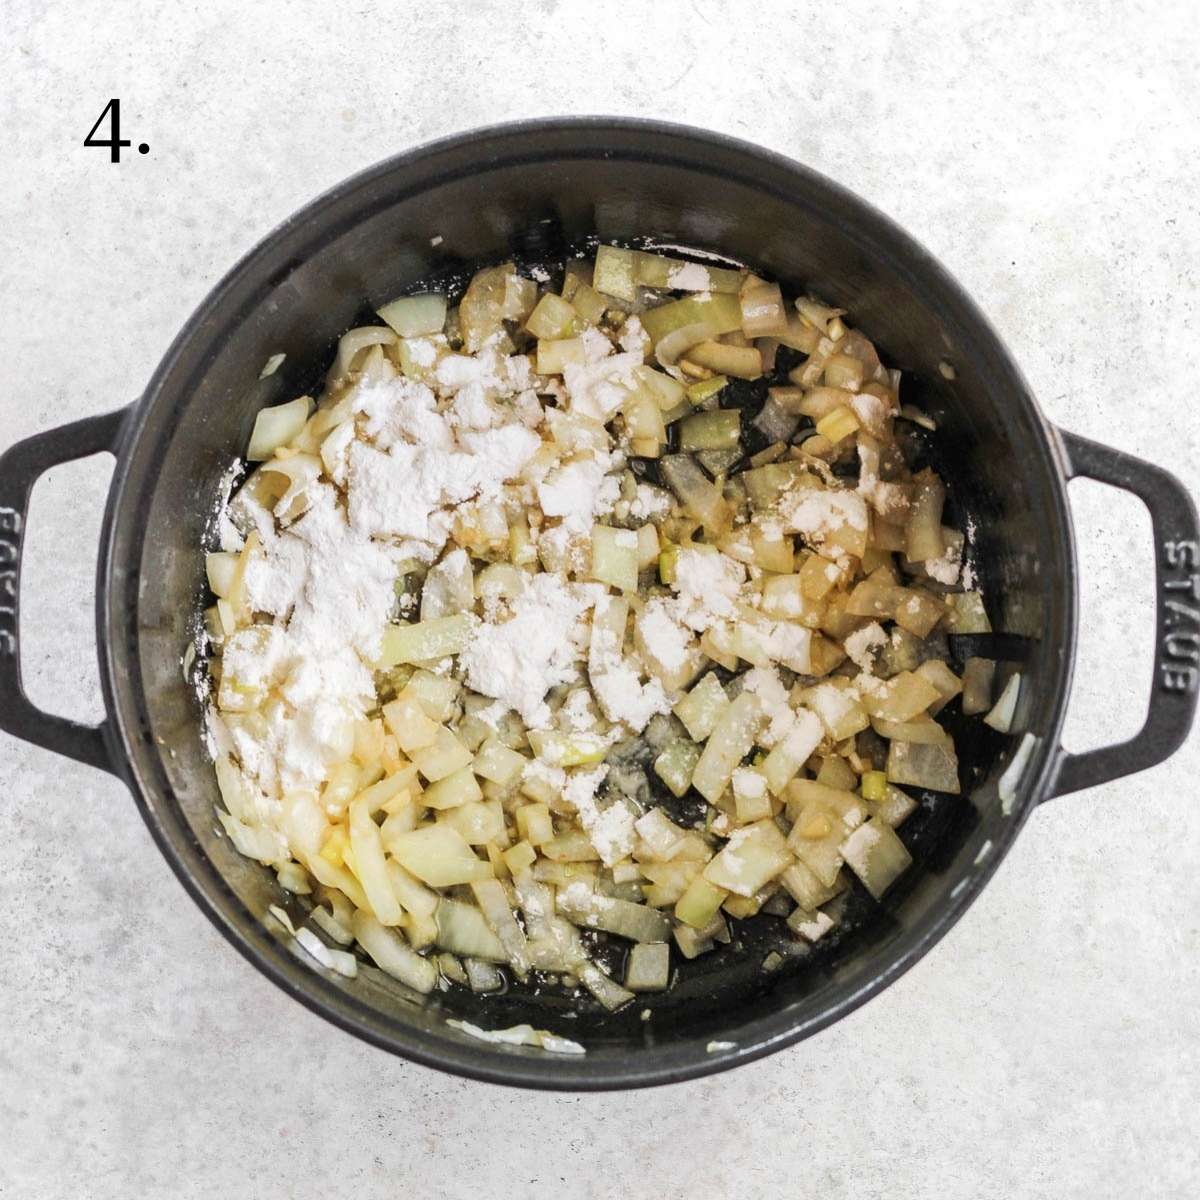 A dutch oven with sauted onions, minced garlic, and arrowroot flour sprinkled on top.